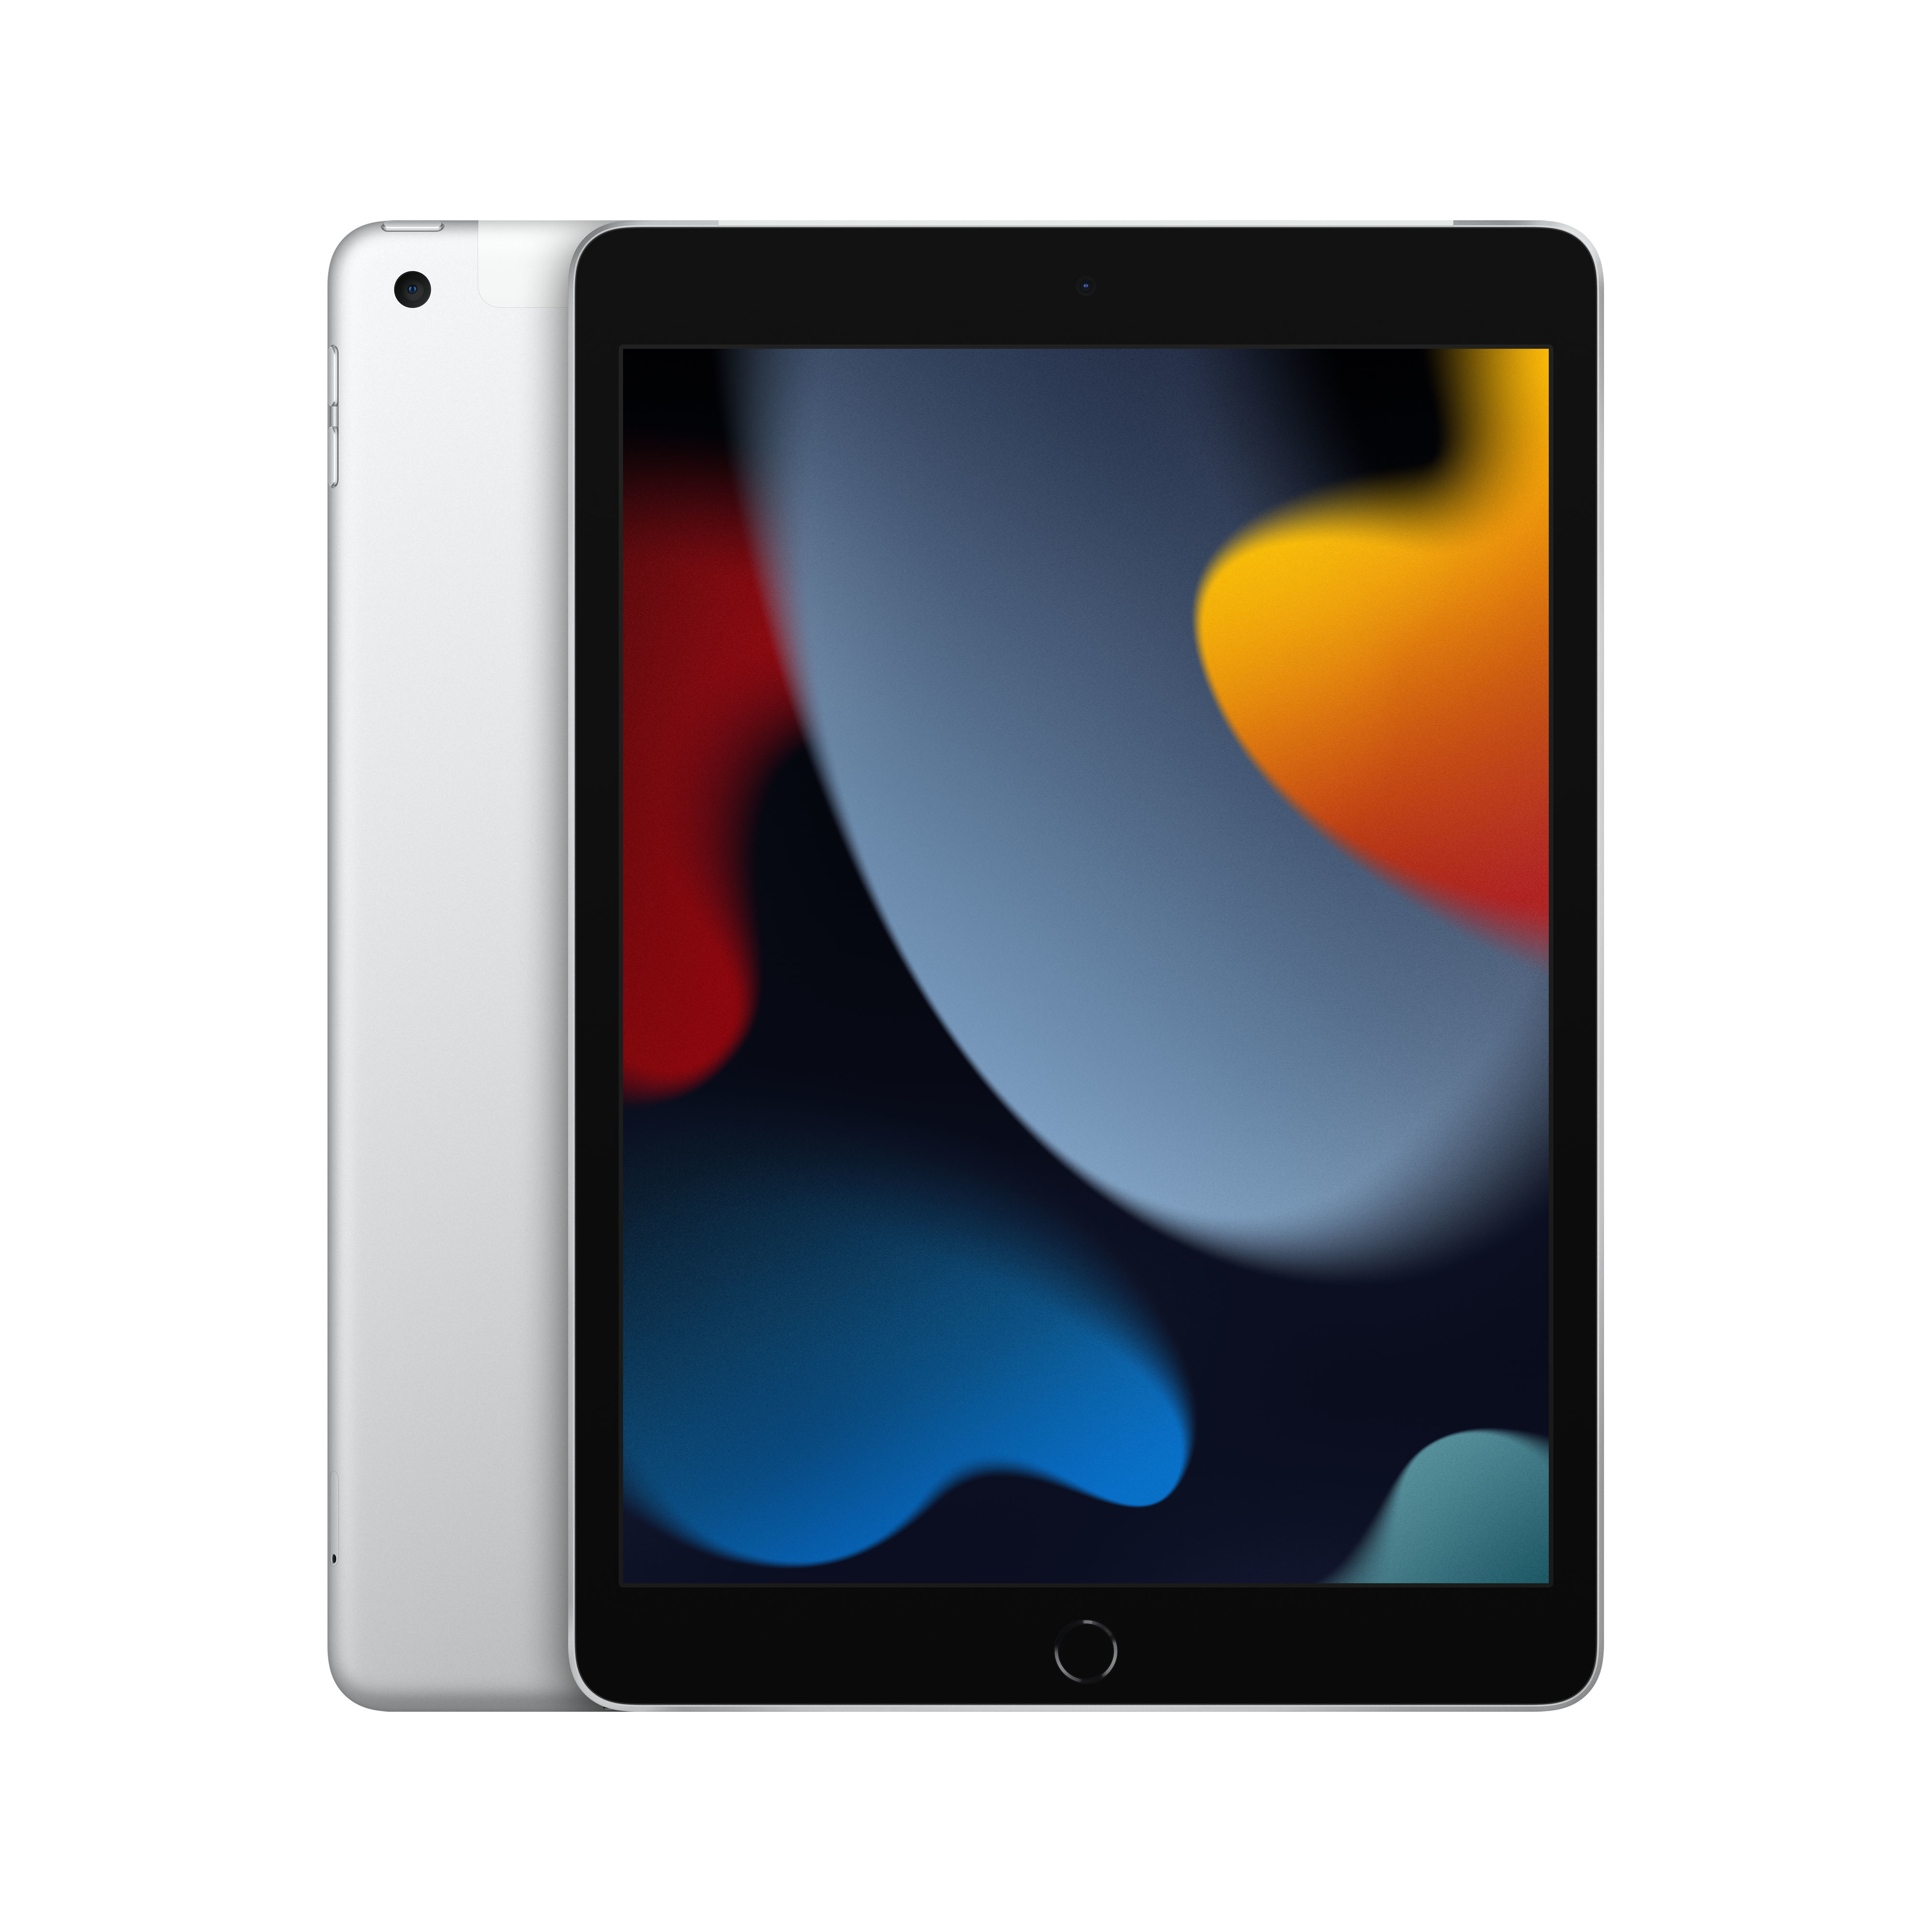 TABLET IPAD 10.2 64GB WIFI-CELL SI LVER 2021